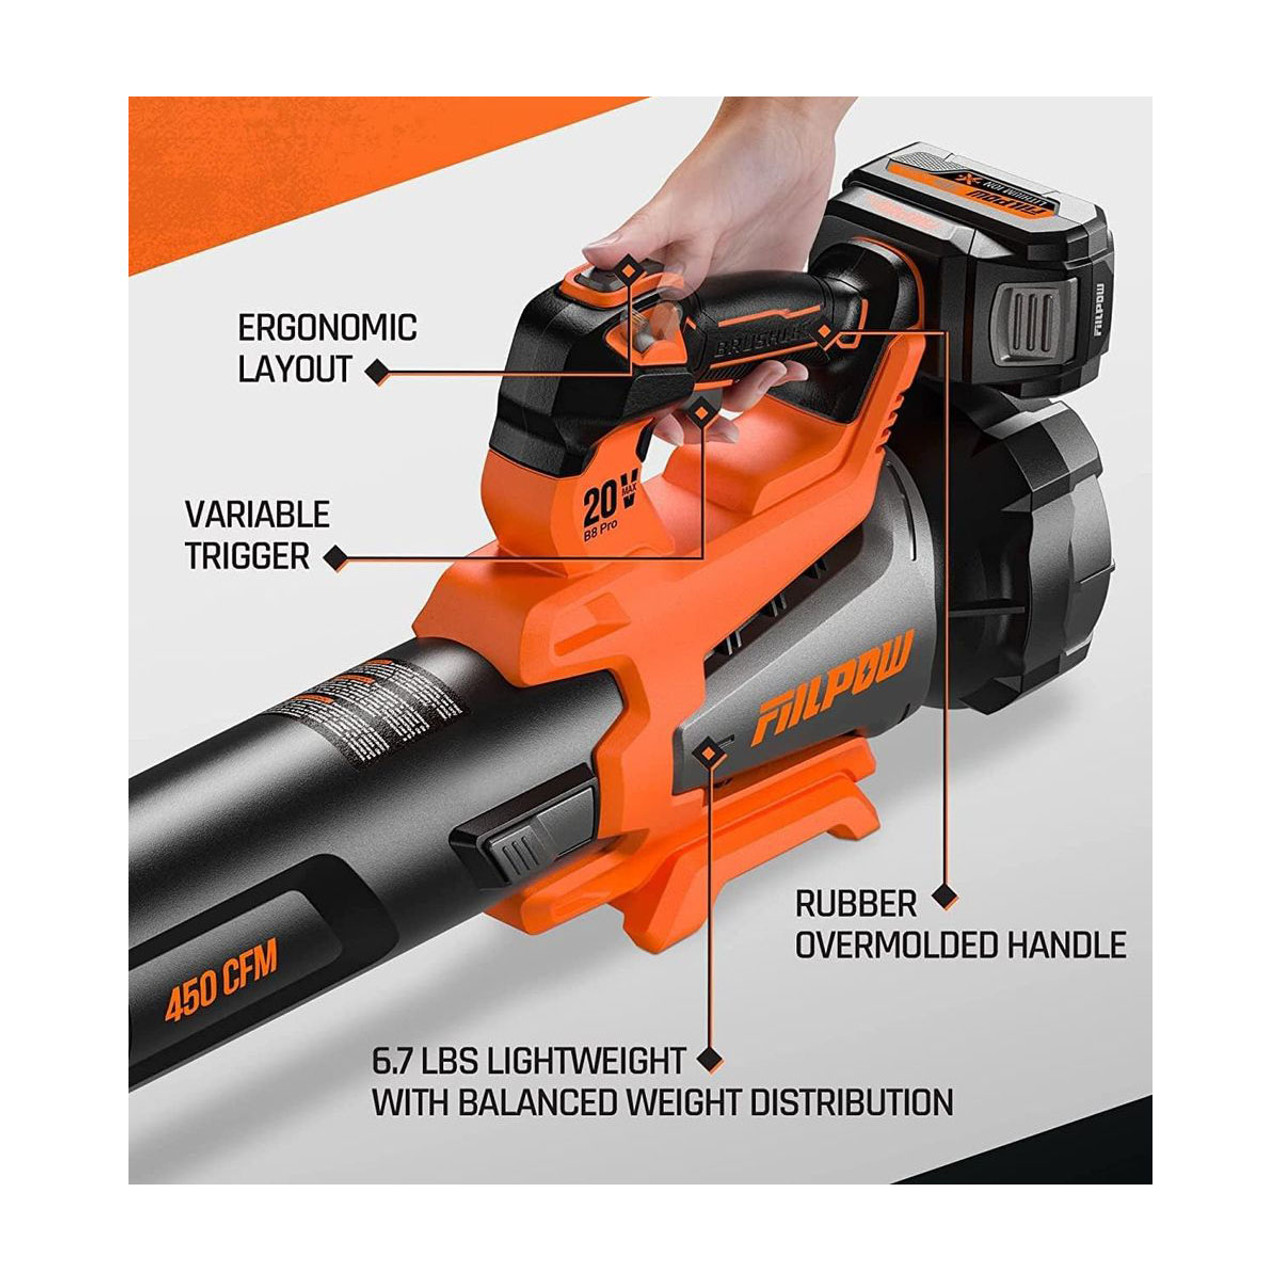 20V 450CFM Cordless Leaf Blower with 4.0Ah Battery by FIILPOW product image